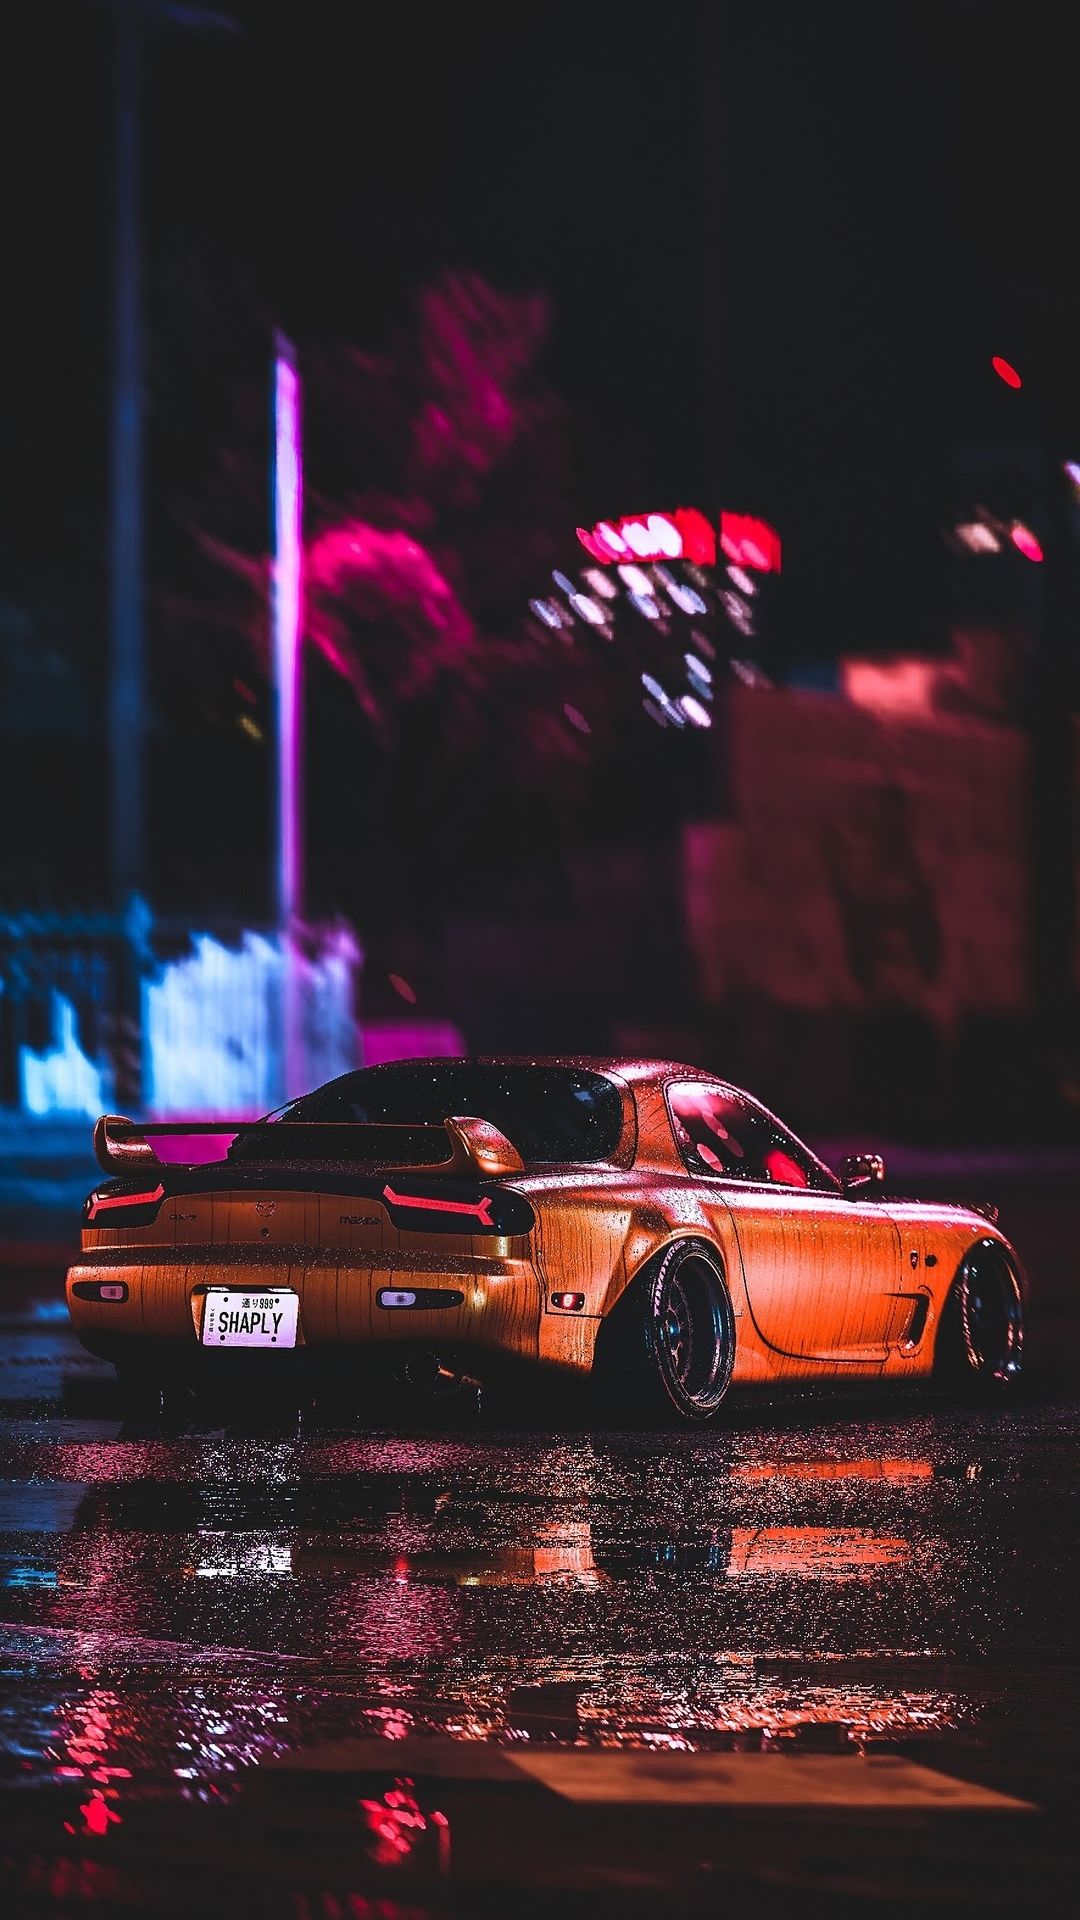 IPhone wallpaper of a gold mazda rx7 in the rain at night - Cars